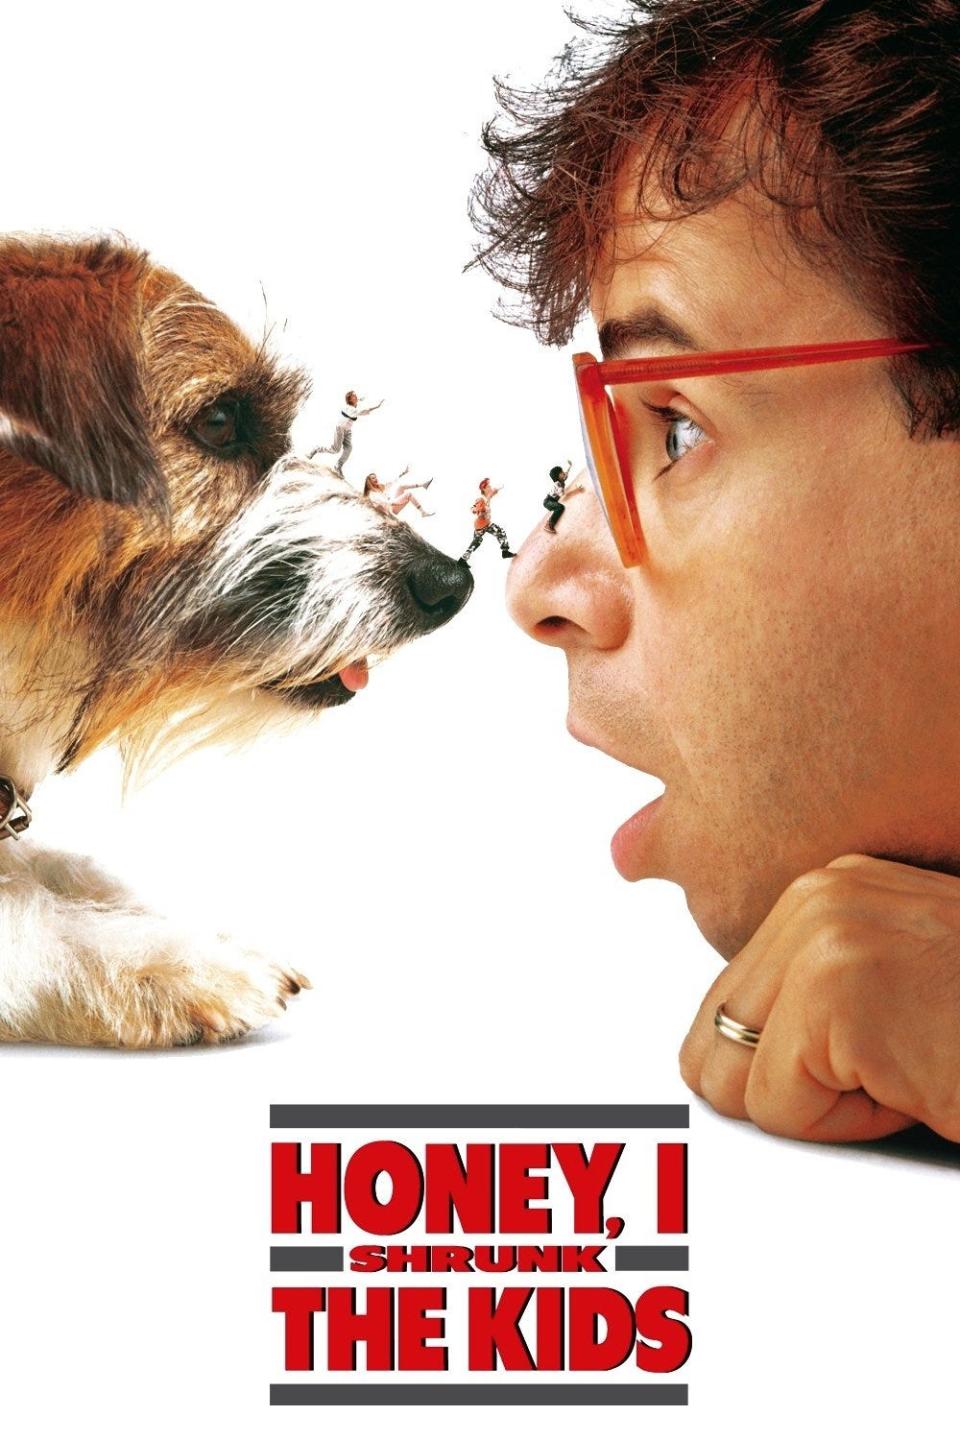 Sunnylands Center & Gardens will screen "Honey, I Shrunk the Kids" on May 13, 2022 as a part of the "Films in the Gardens" series.